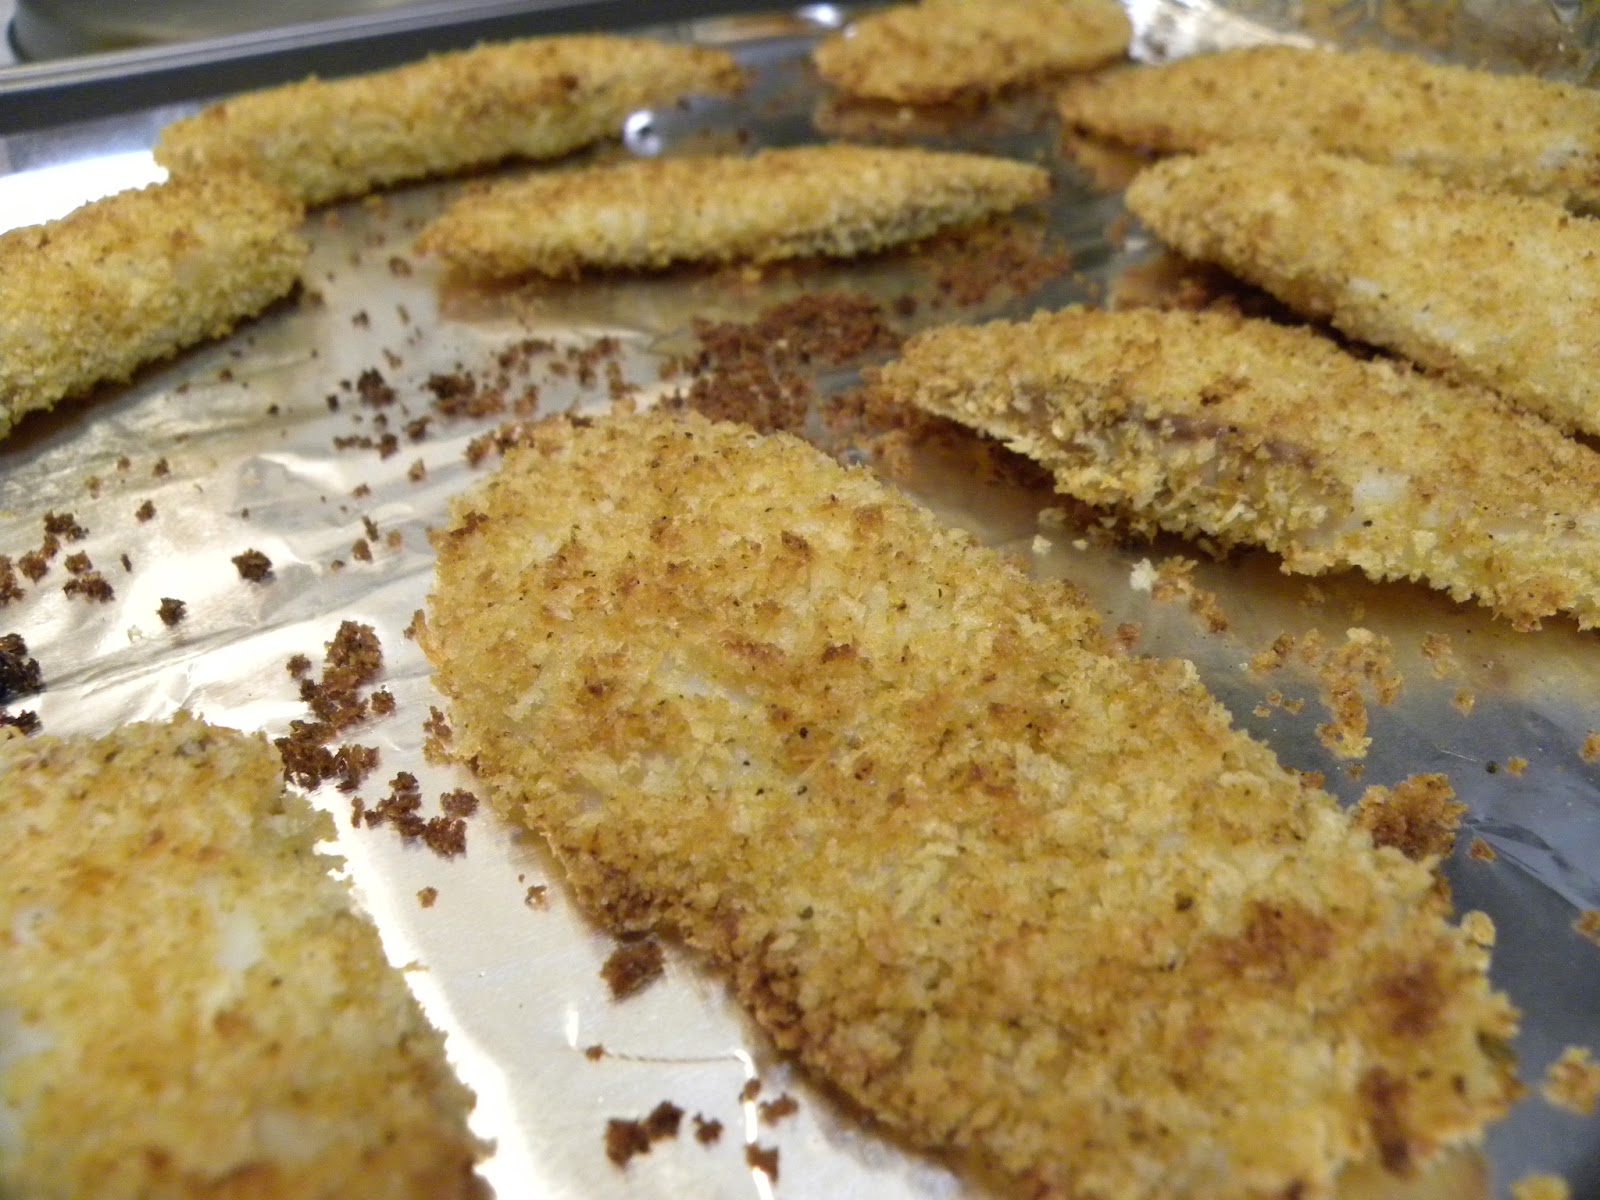 The Magnificent Mrs. Morales: Crispy, Baked Tilapia with Panko Crumbs